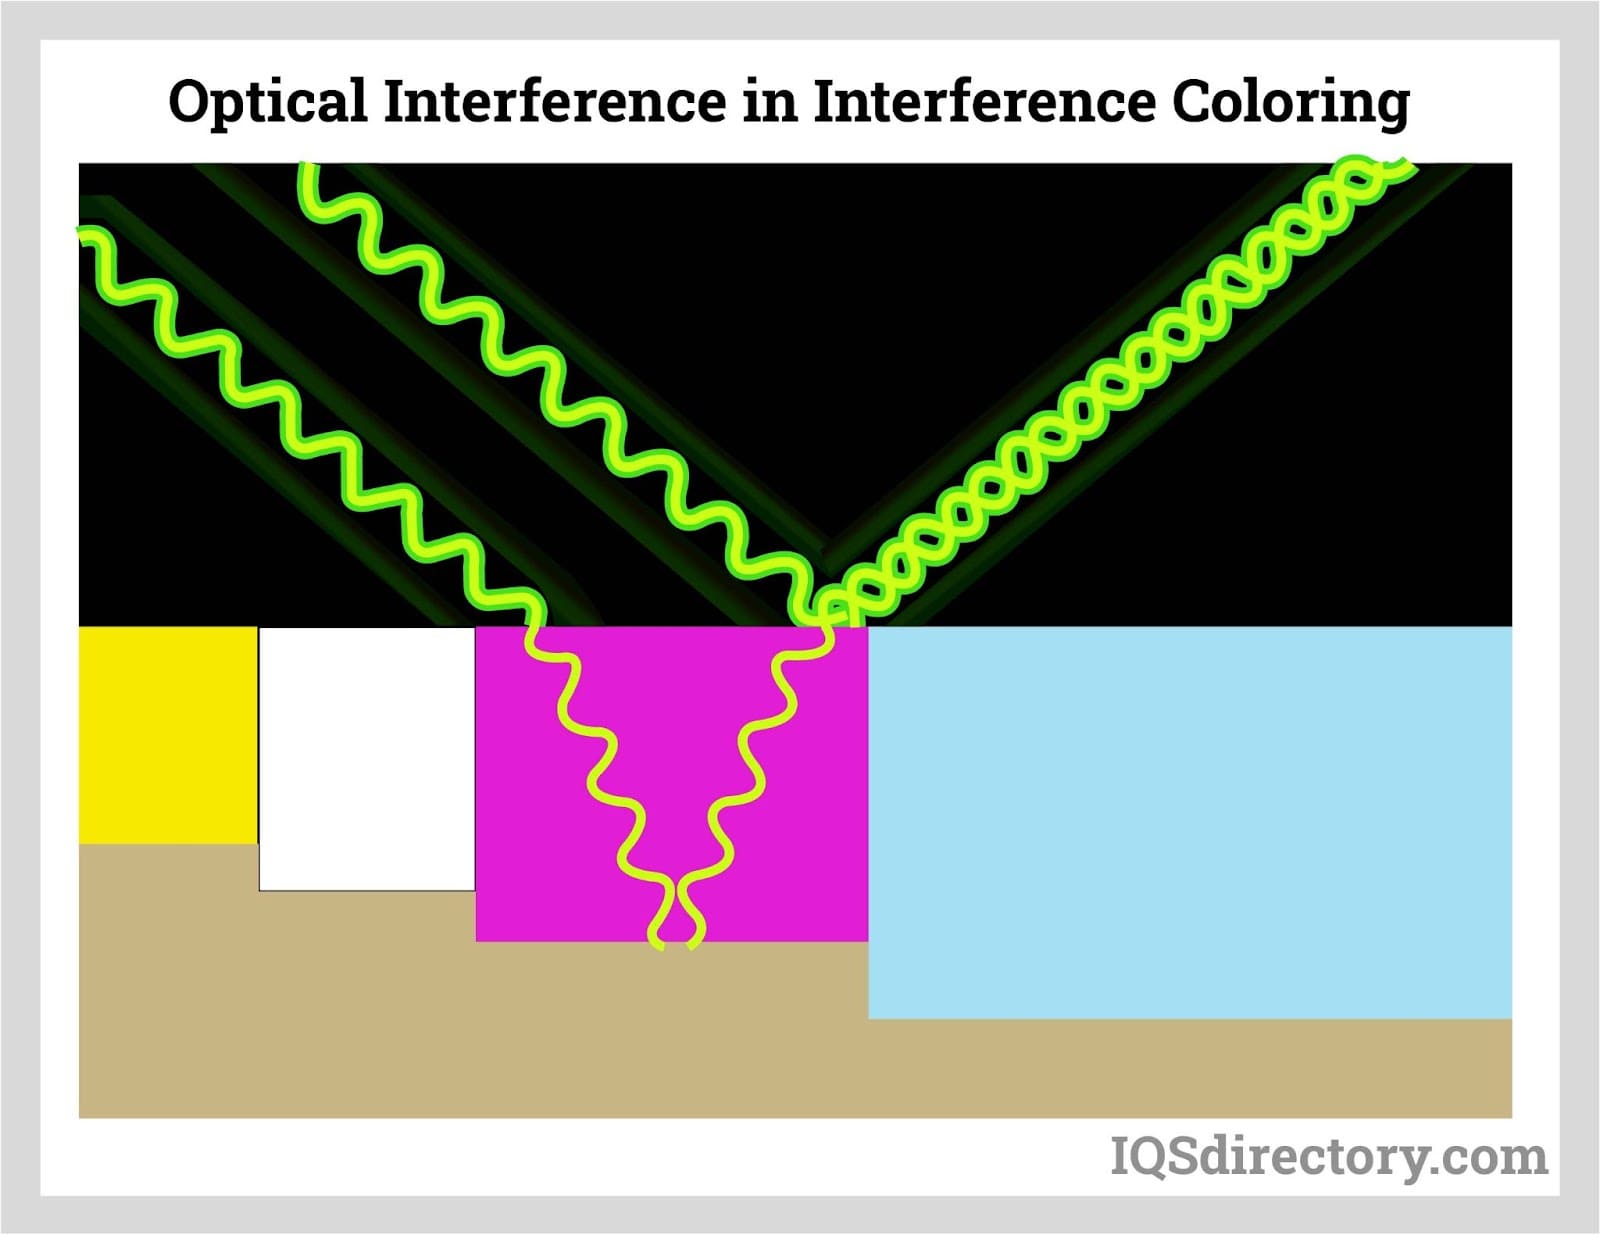 Optical Interference in Interference Coloring